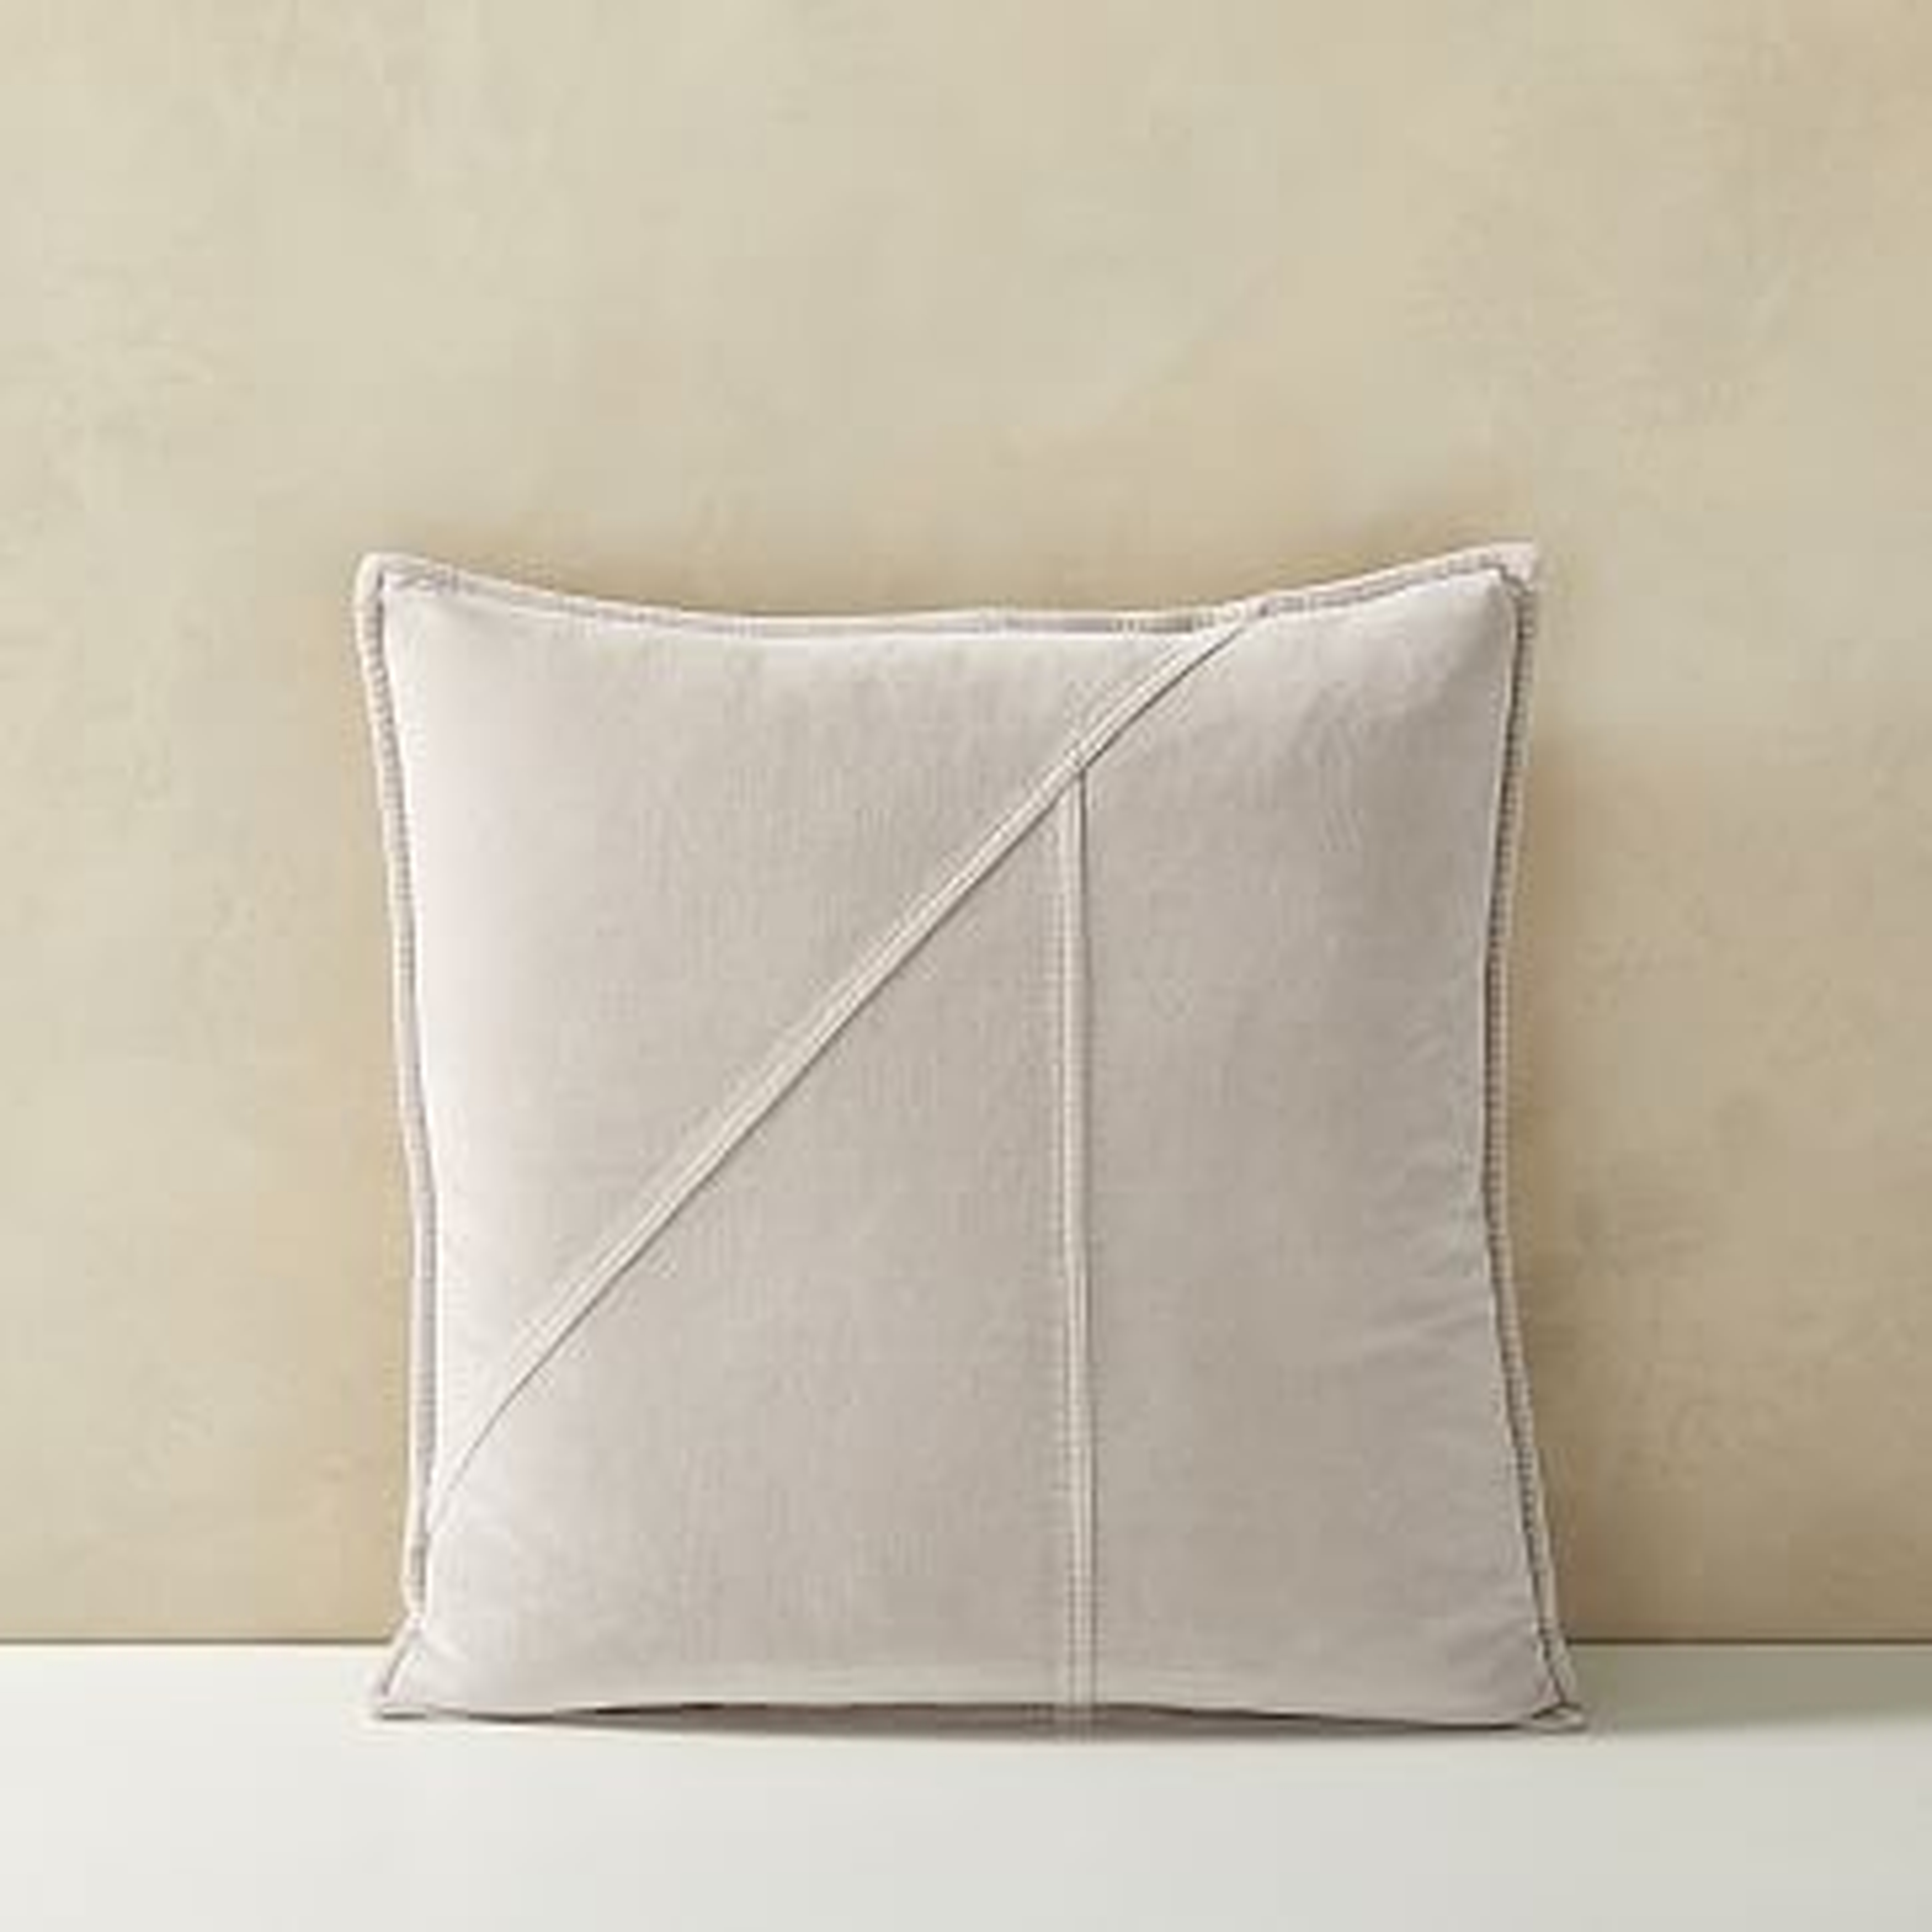 Washed Cotton Velvet Pillow Cover, Set of 2, Stone Gray, 18"x18" - West Elm